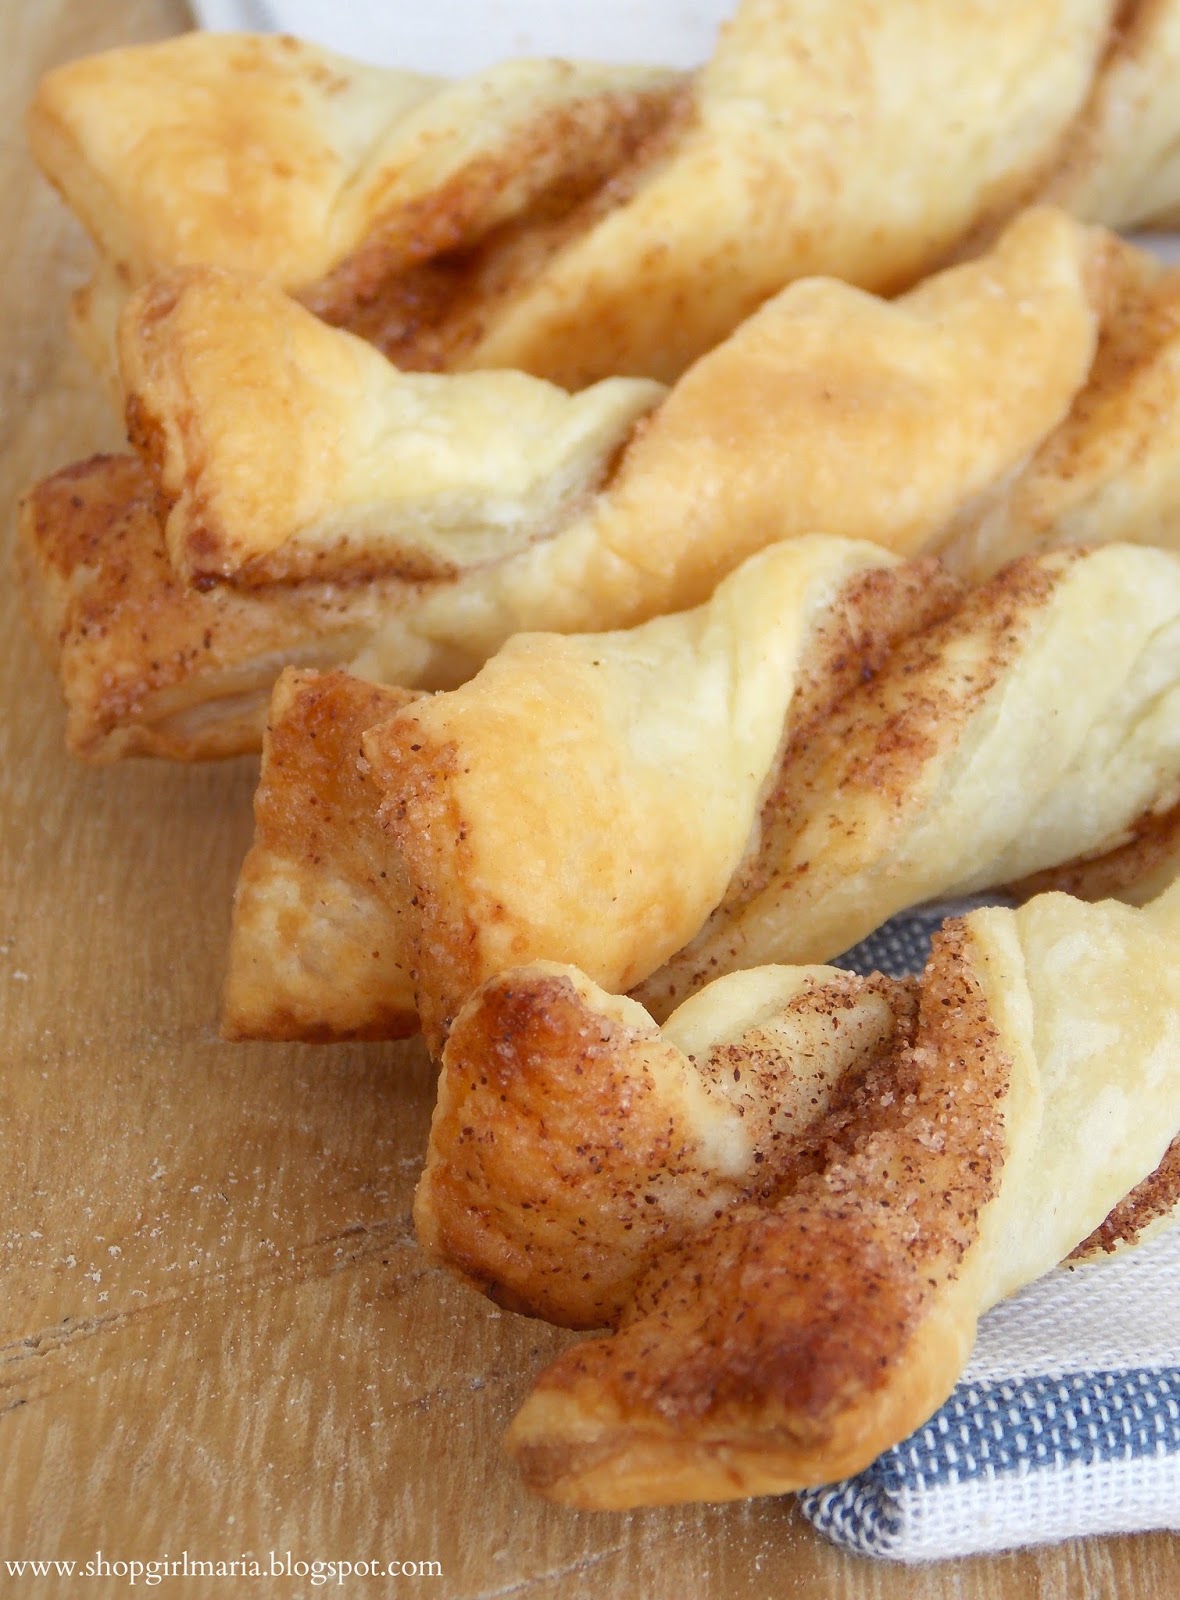 25 Delicious Puff Pastry Ideas and Recipes